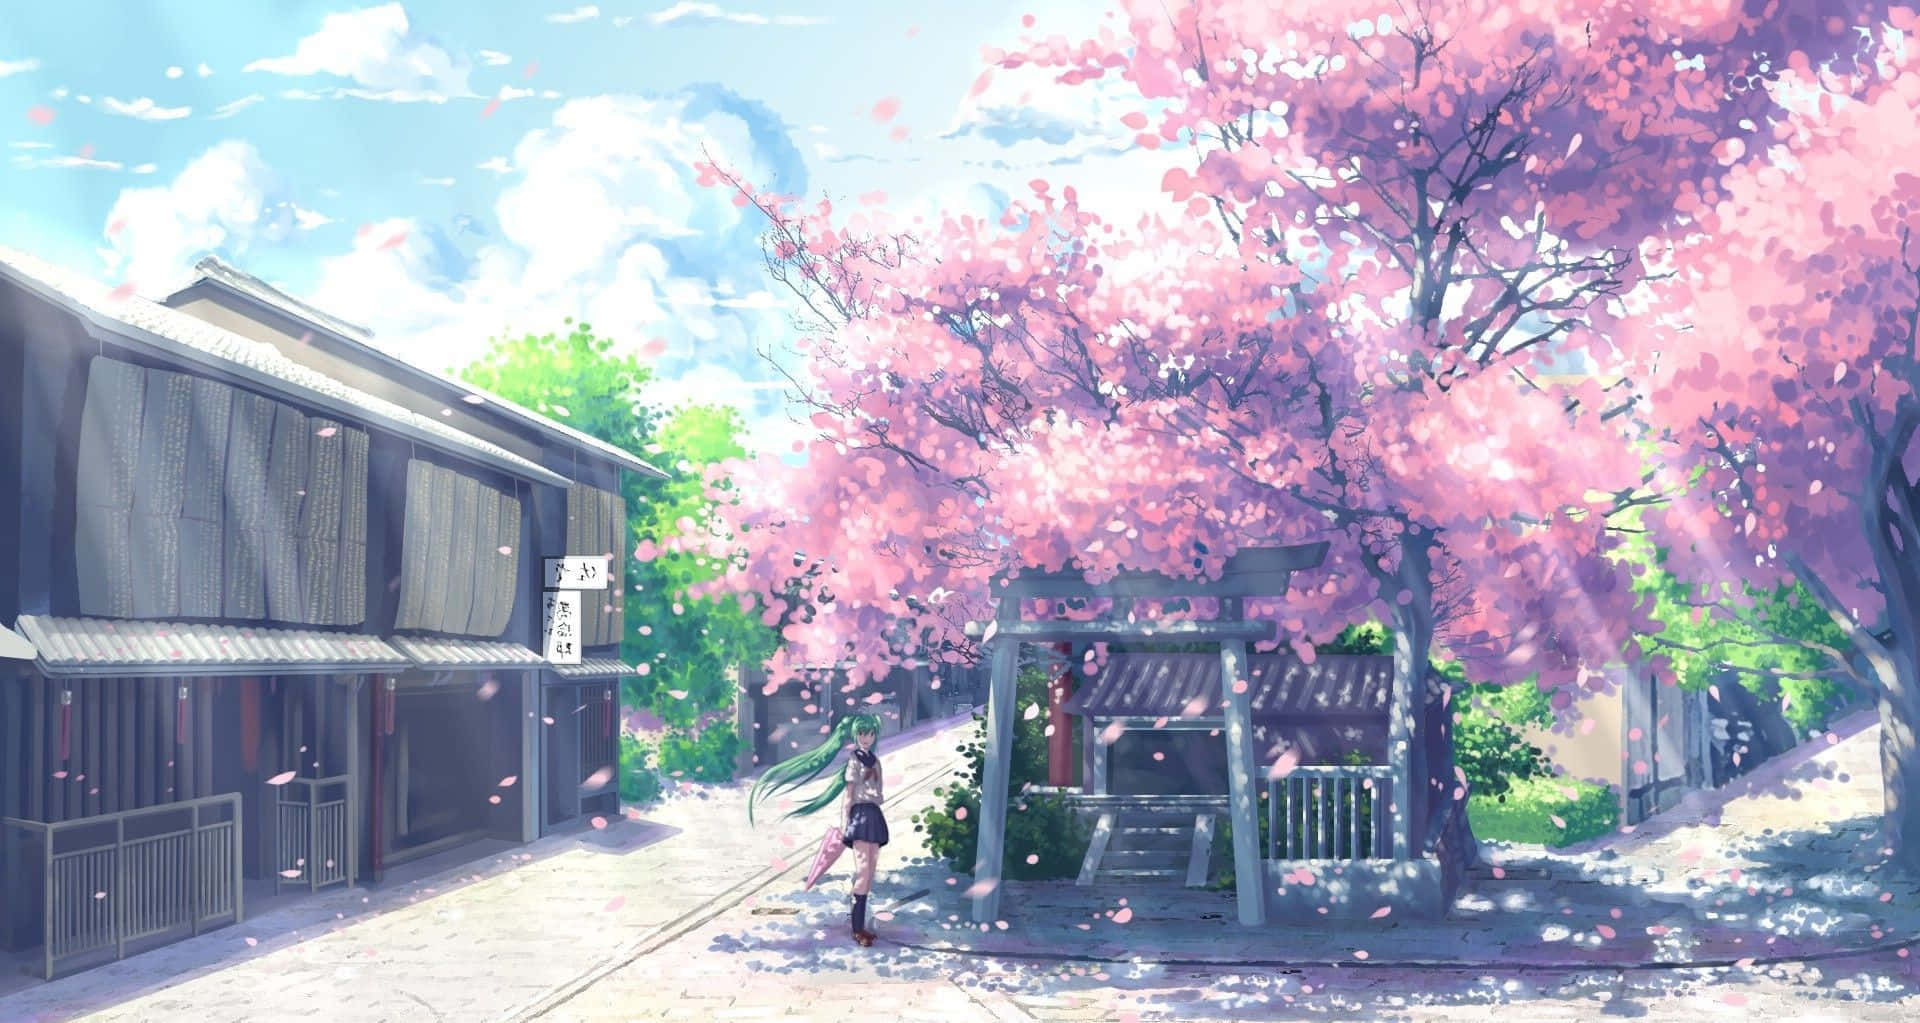 Relax and find serenity with a Japanese Aesthetic Desktop Wallpaper